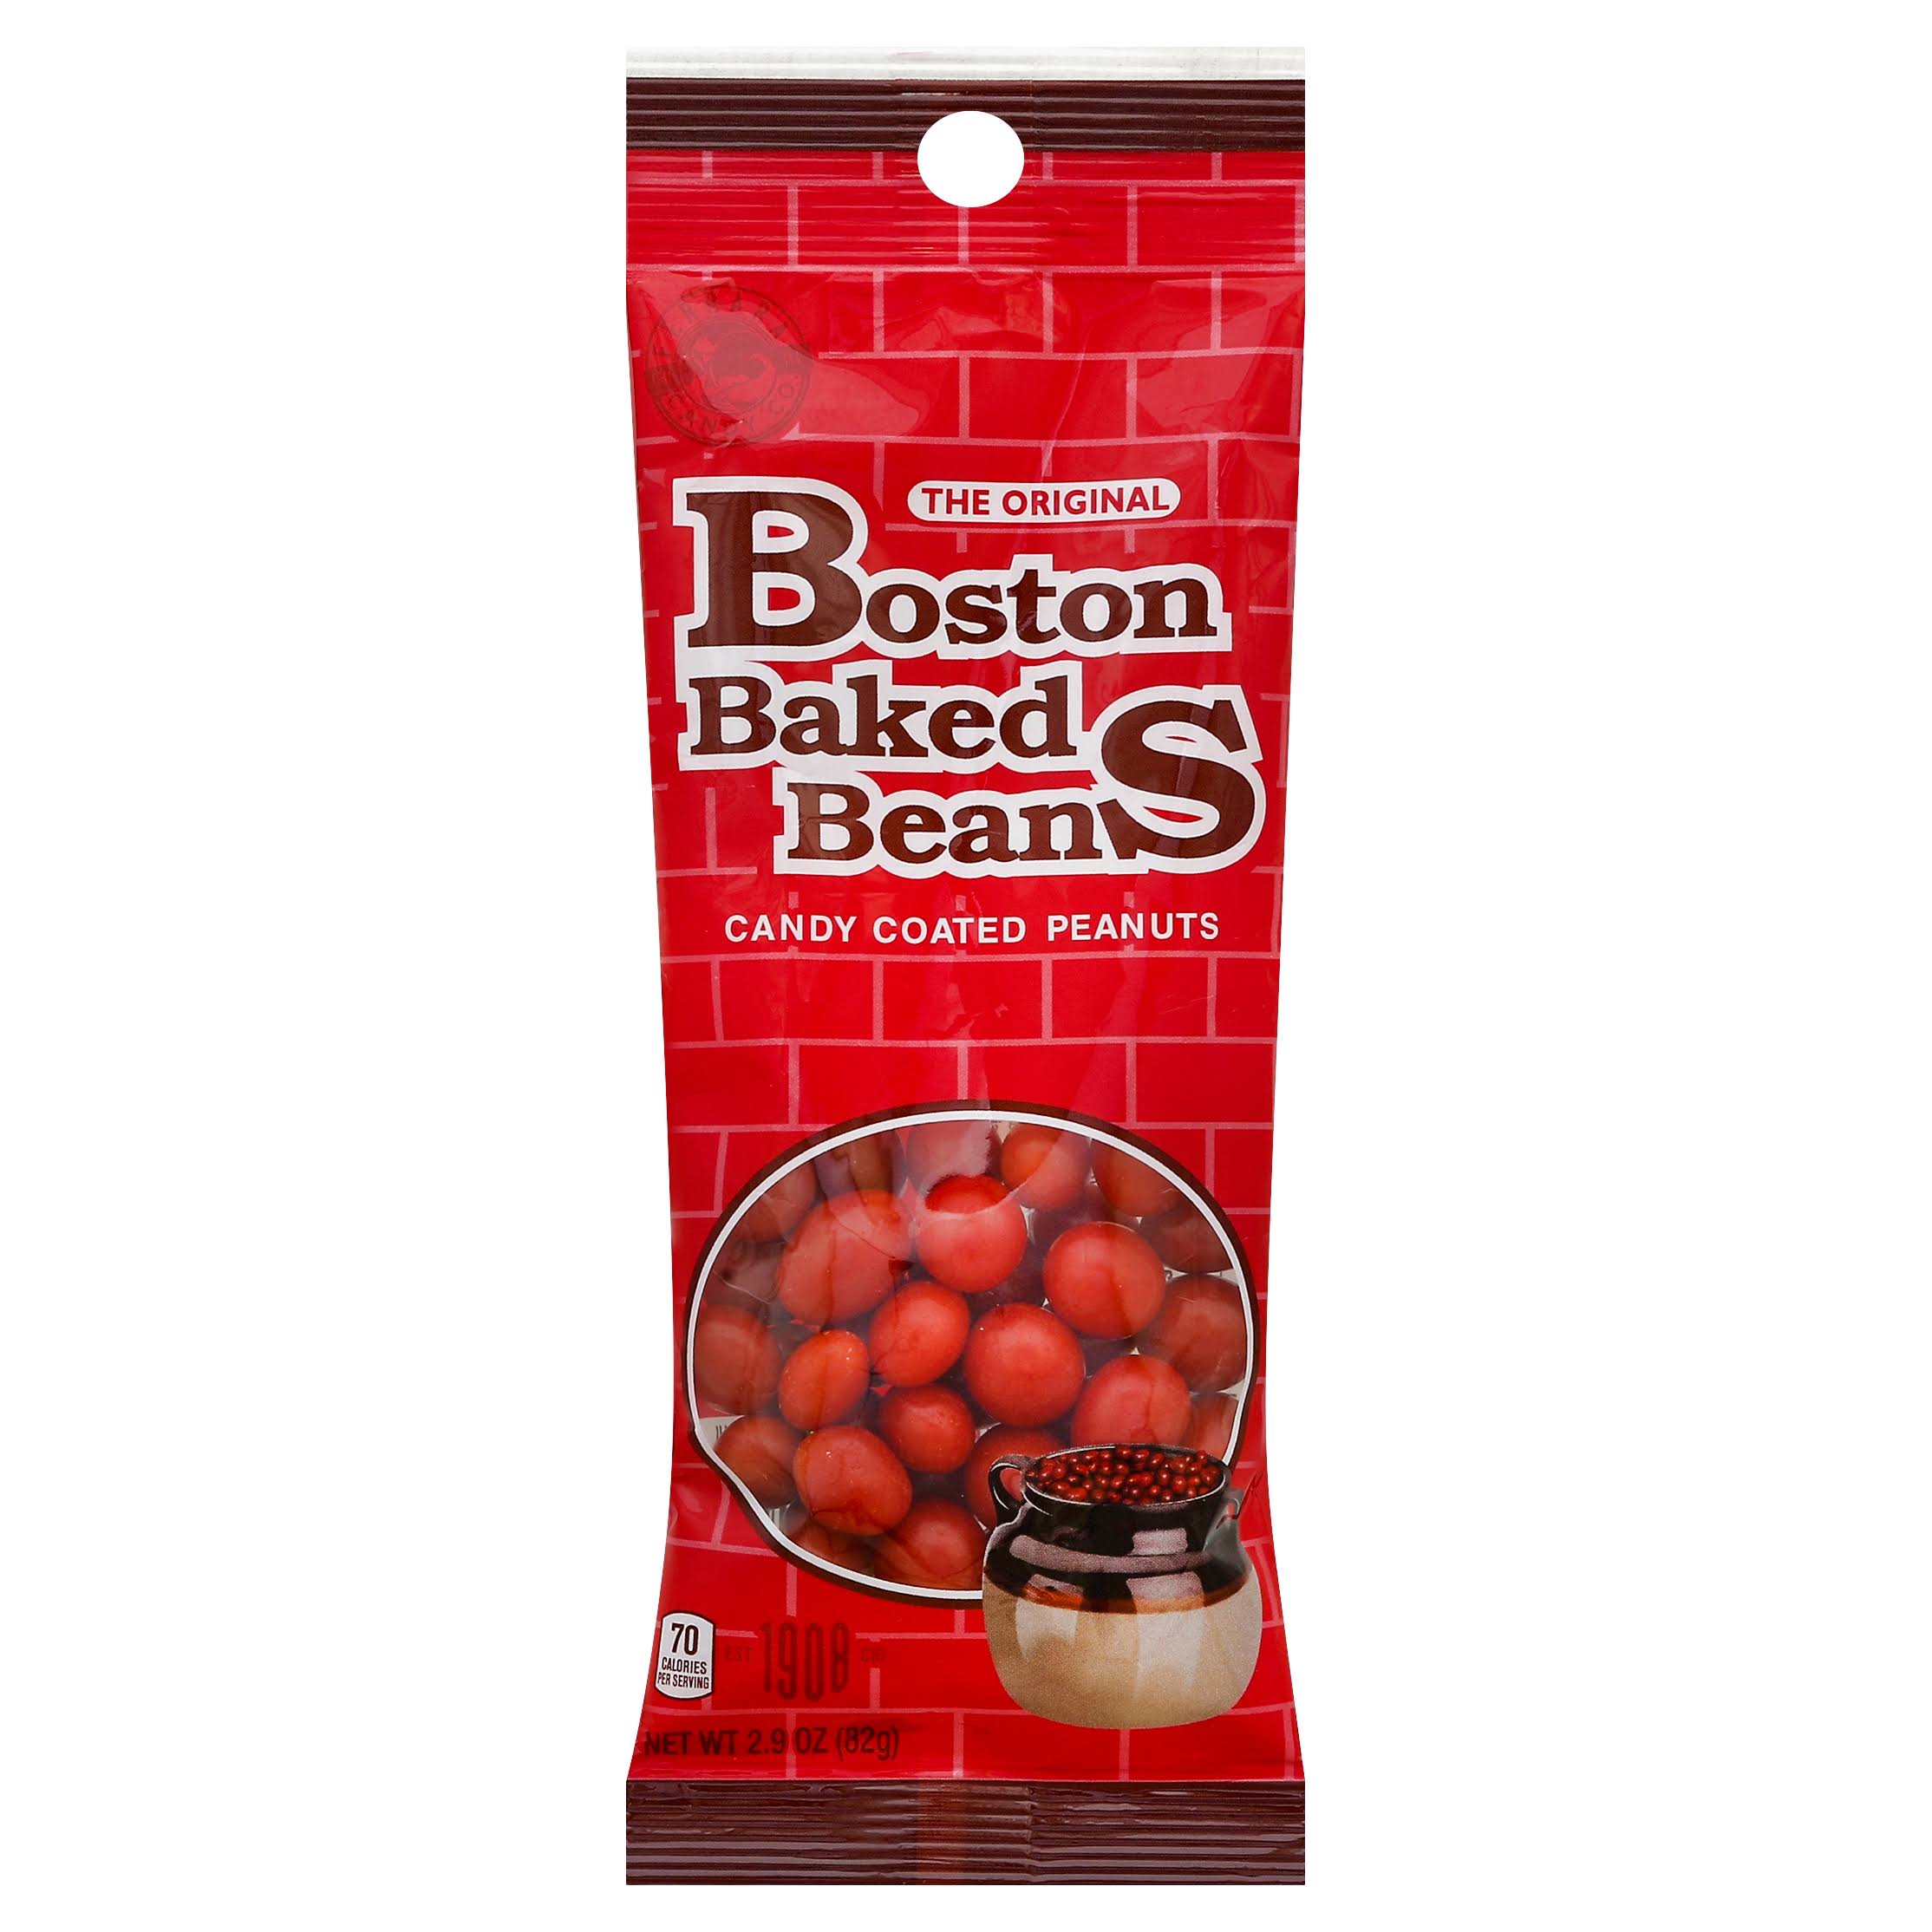 Boston Baked Beans Peanuts, Candy Coated - 2.9 oz